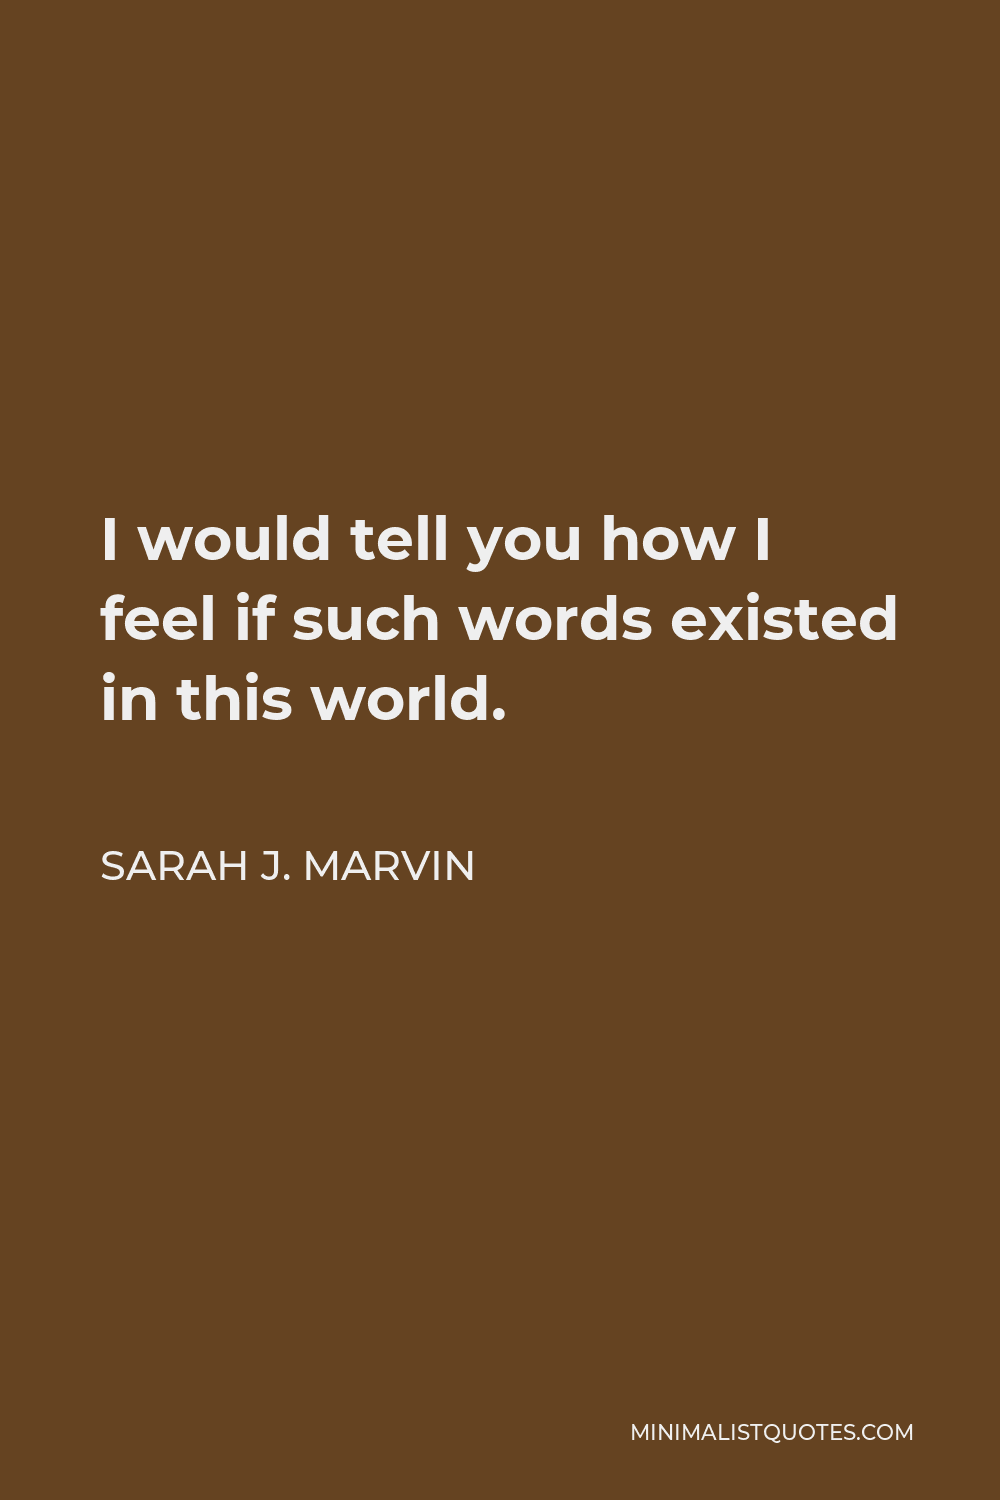 Sarah J. Marvin Quote - I would tell you how I feel if such words existed in this world.